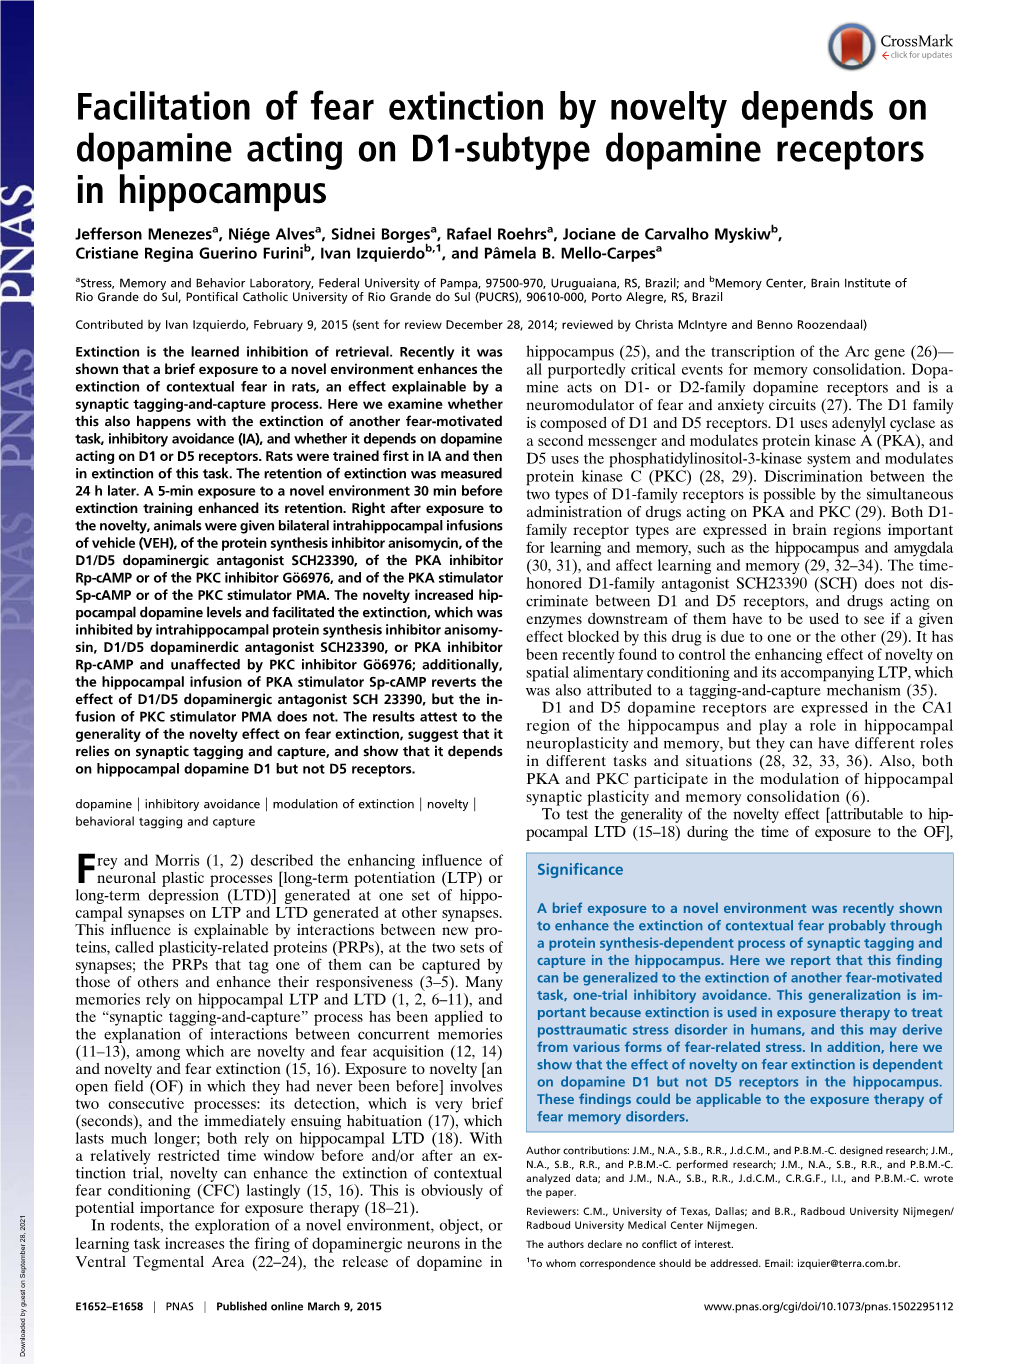 Facilitation of Fear Extinction by Novelty Depends on Dopamine Acting on D1-Subtype Dopamine Receptors in Hippocampus